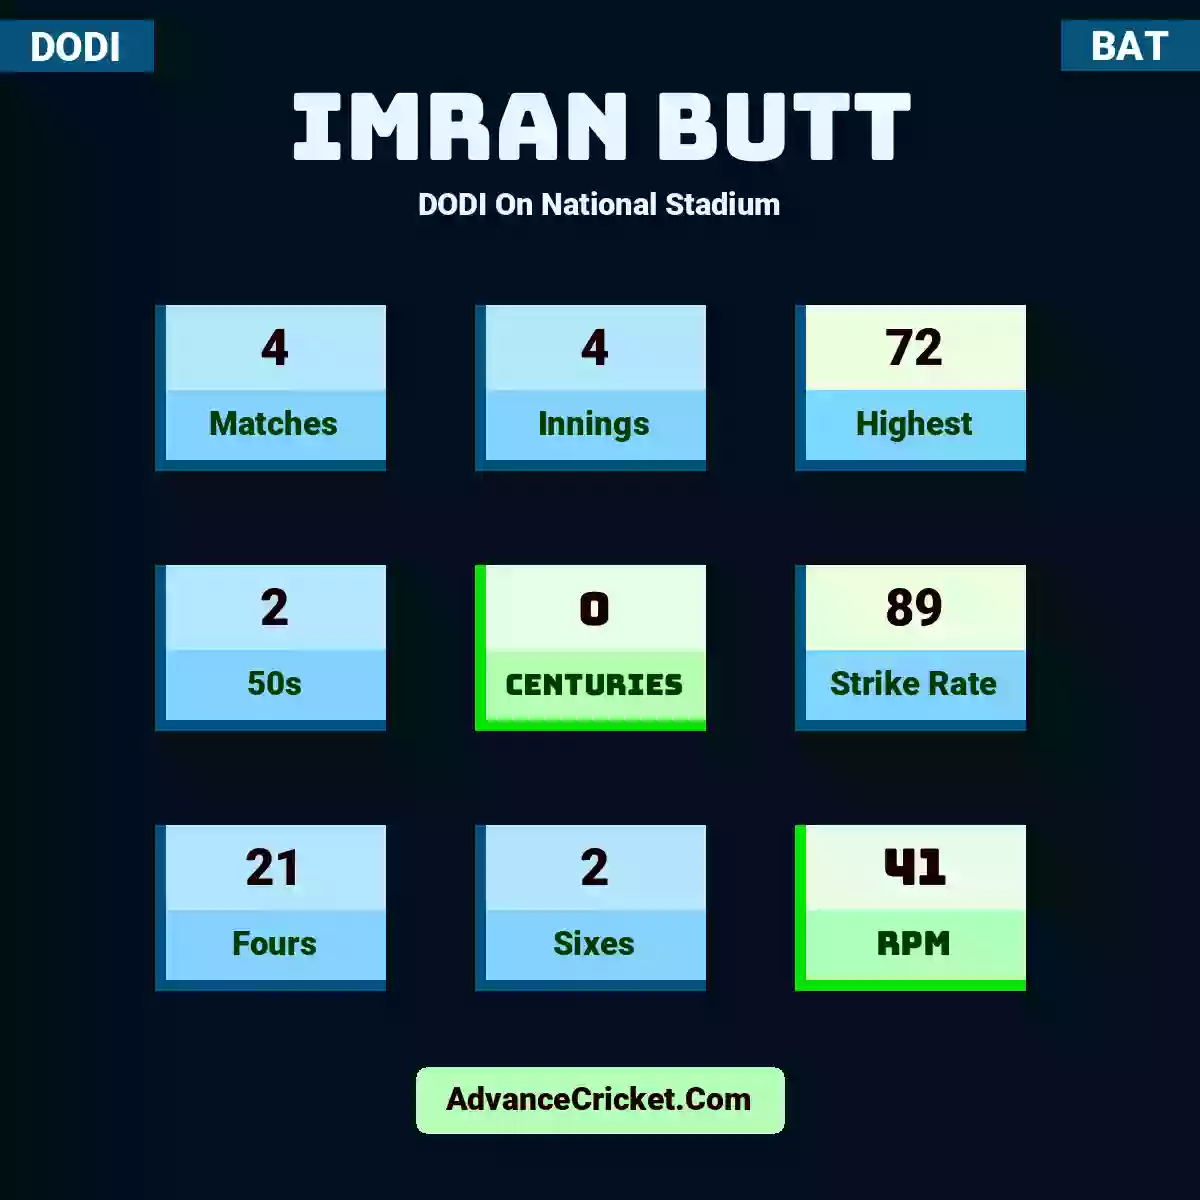 Imran Butt DODI  On National Stadium, Imran Butt played 4 matches, scored 72 runs as highest, 2 half-centuries, and 0 centuries, with a strike rate of 89. I.Butt hit 21 fours and 2 sixes, with an RPM of 41.